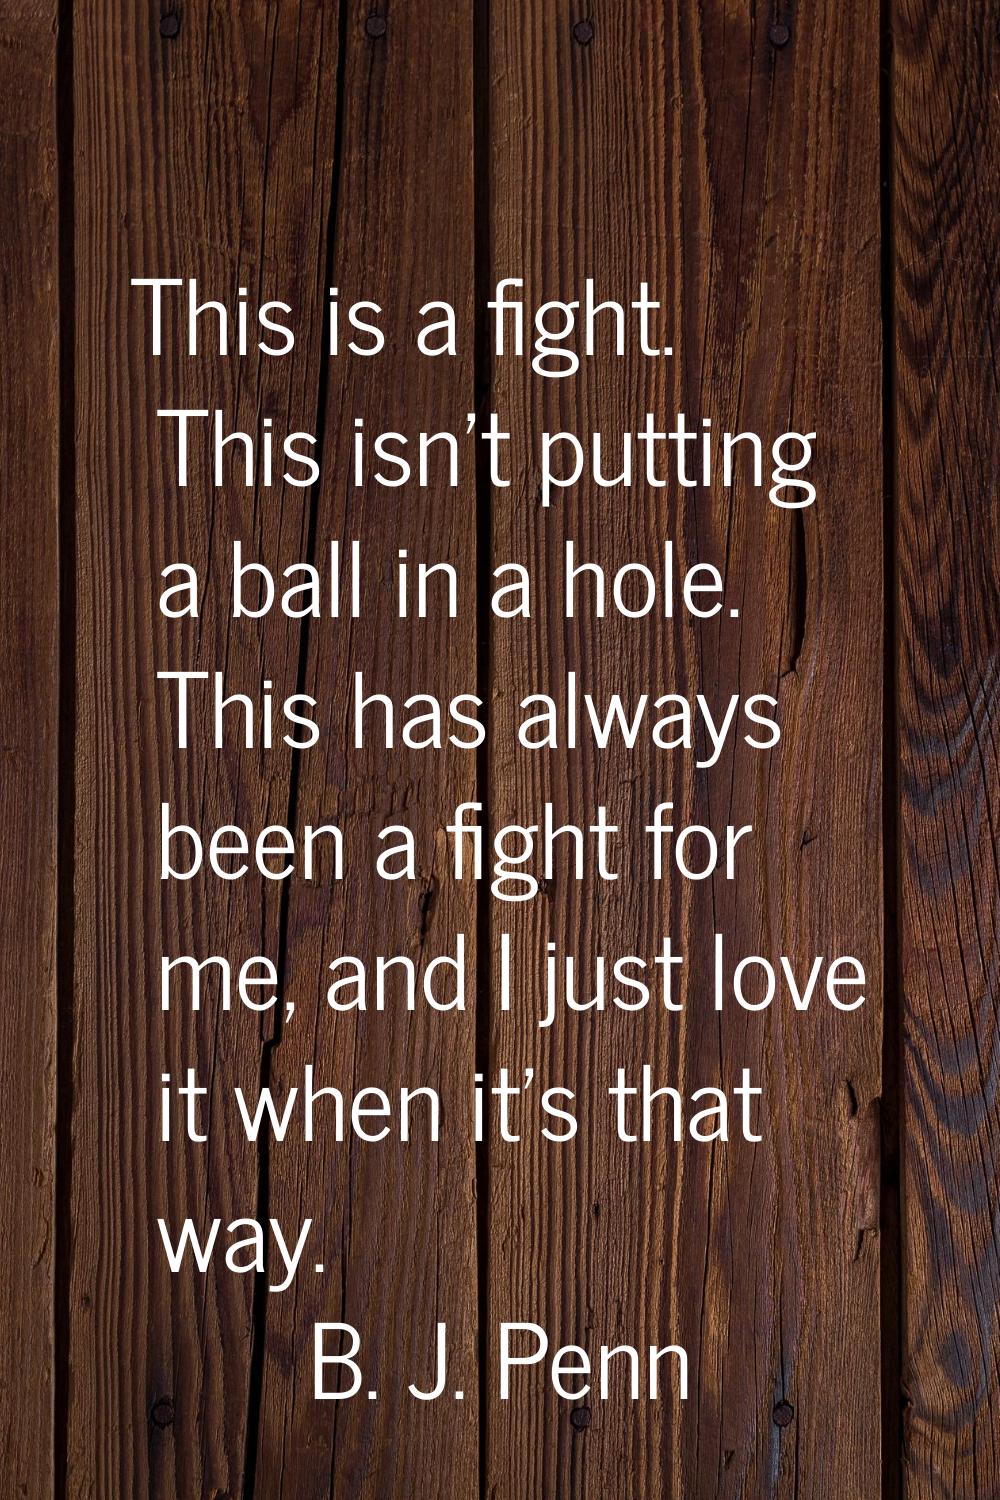 This is a fight. This isn't putting a ball in a hole. This has always been a fight for me, and I ju